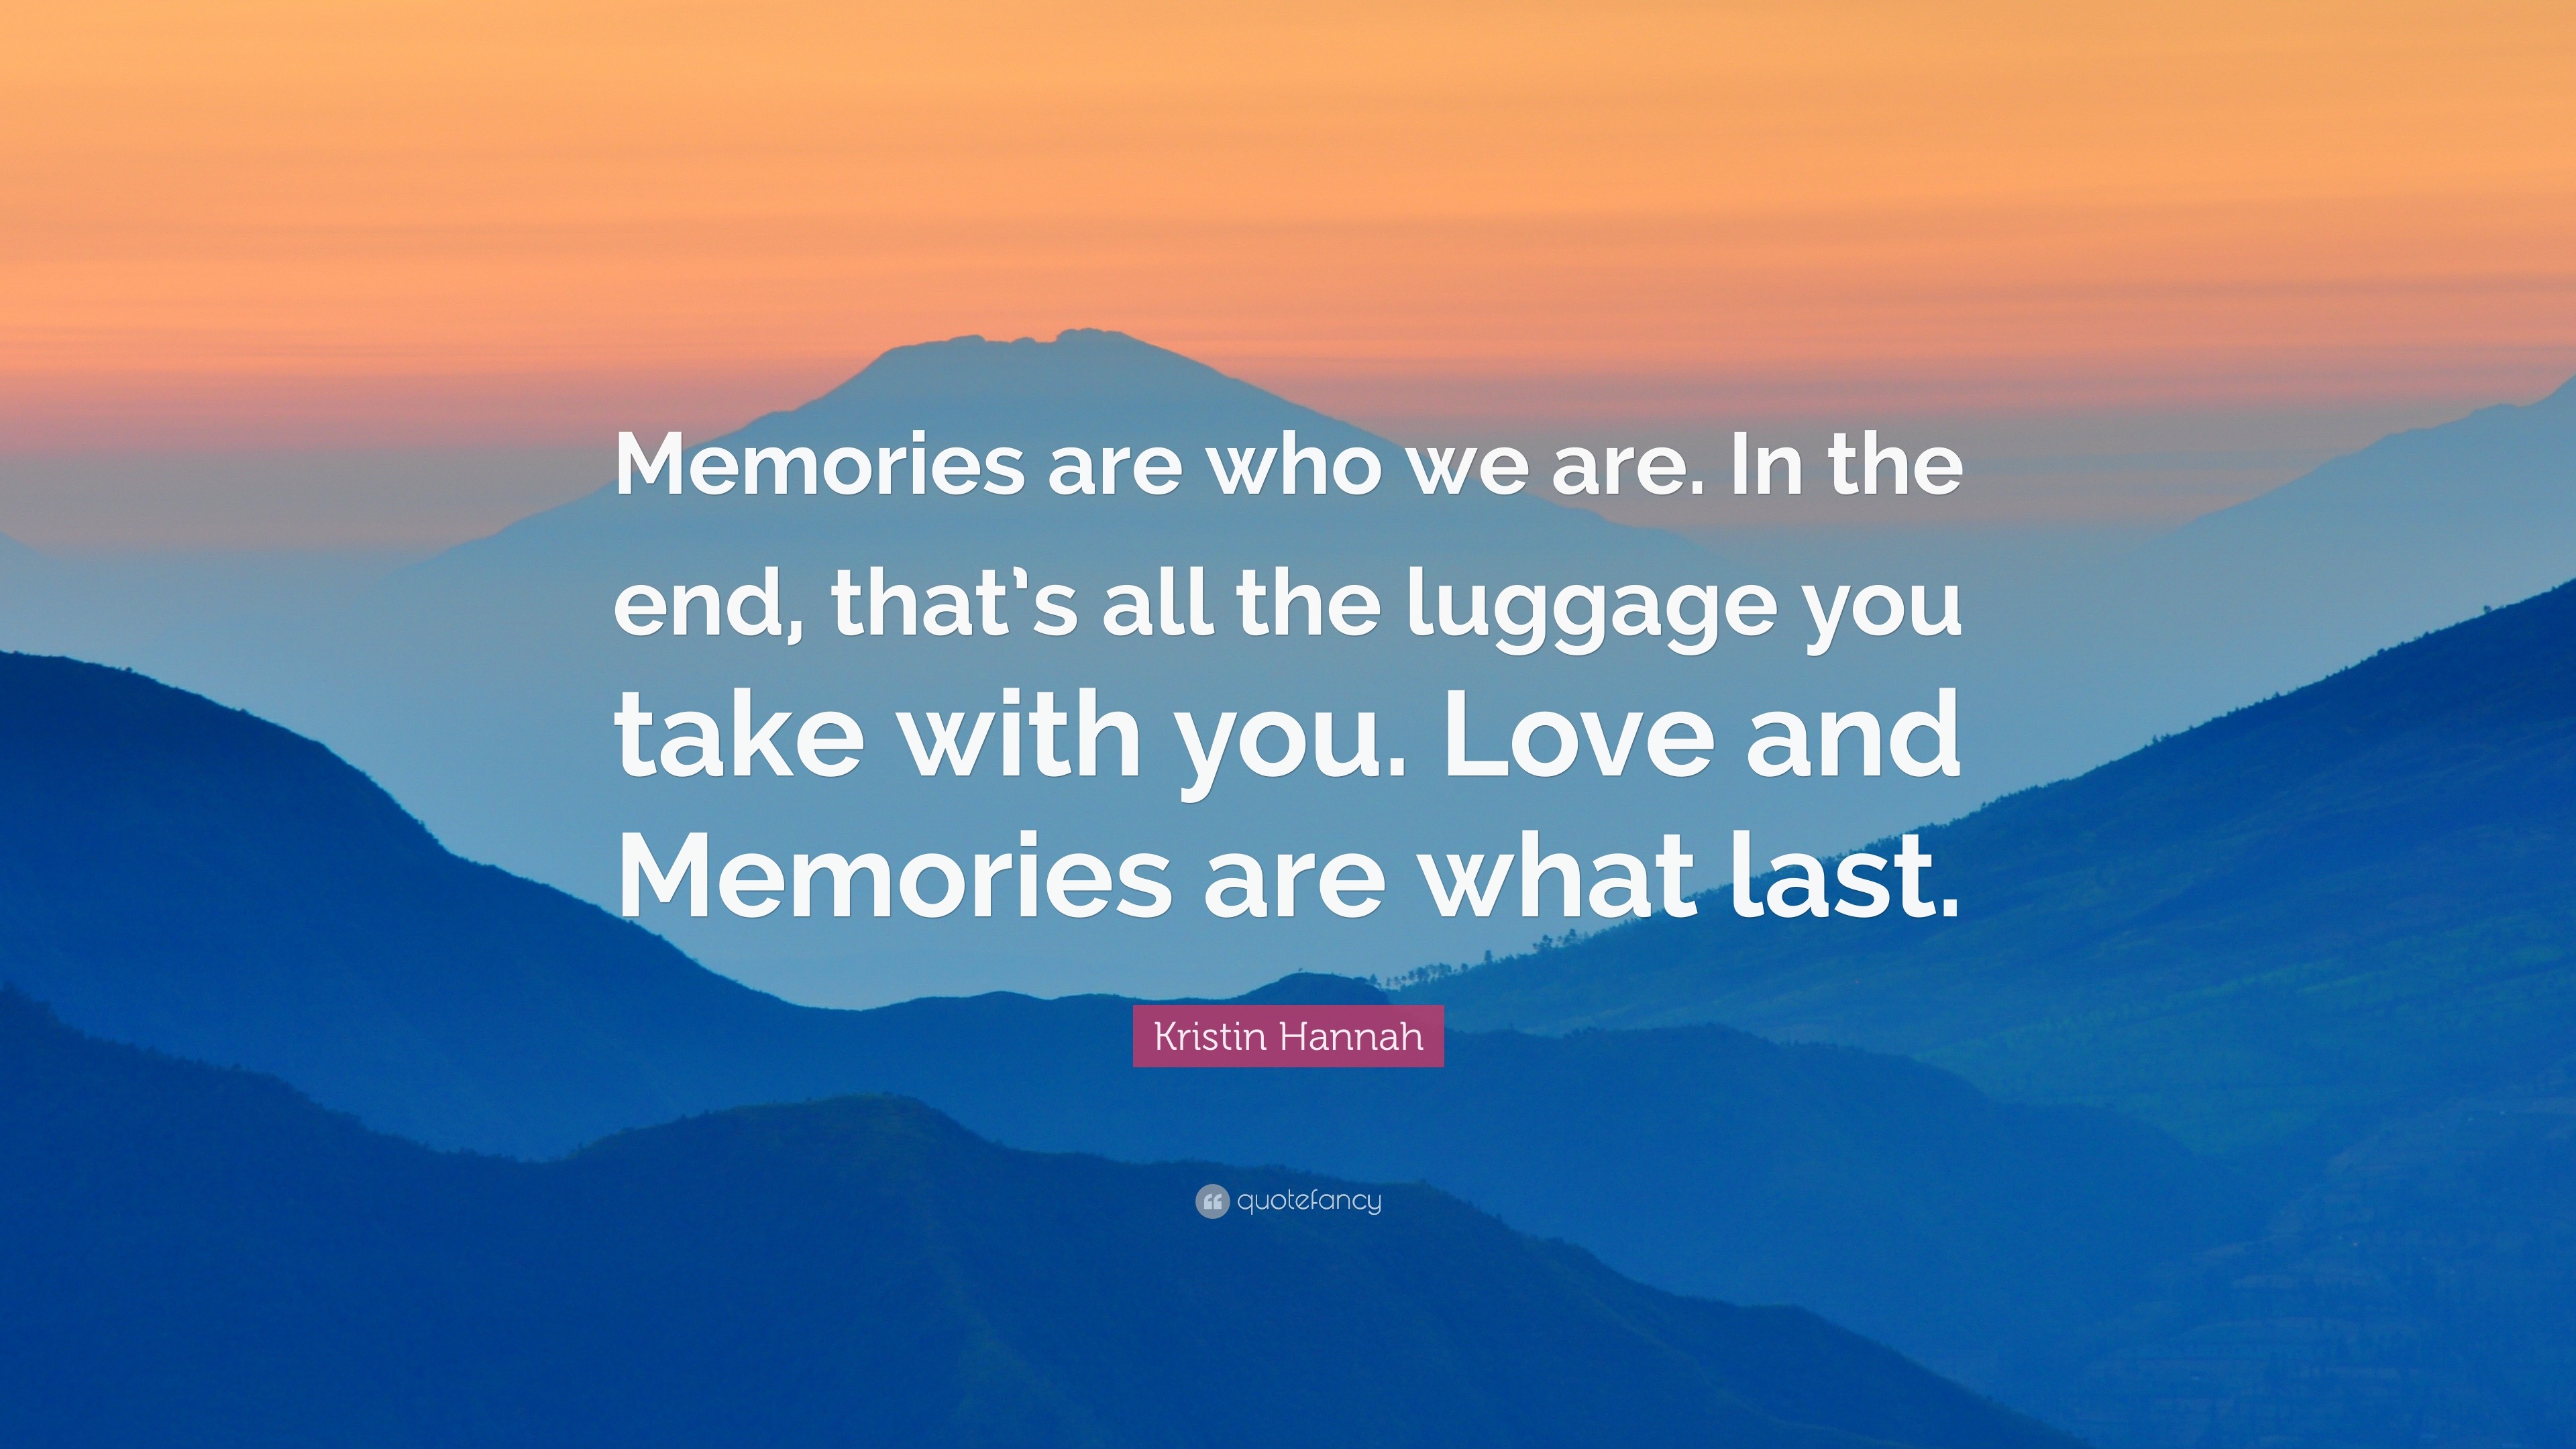 Kristin Hannah Quote: “Memories are who we are. In the end, that’s all ...